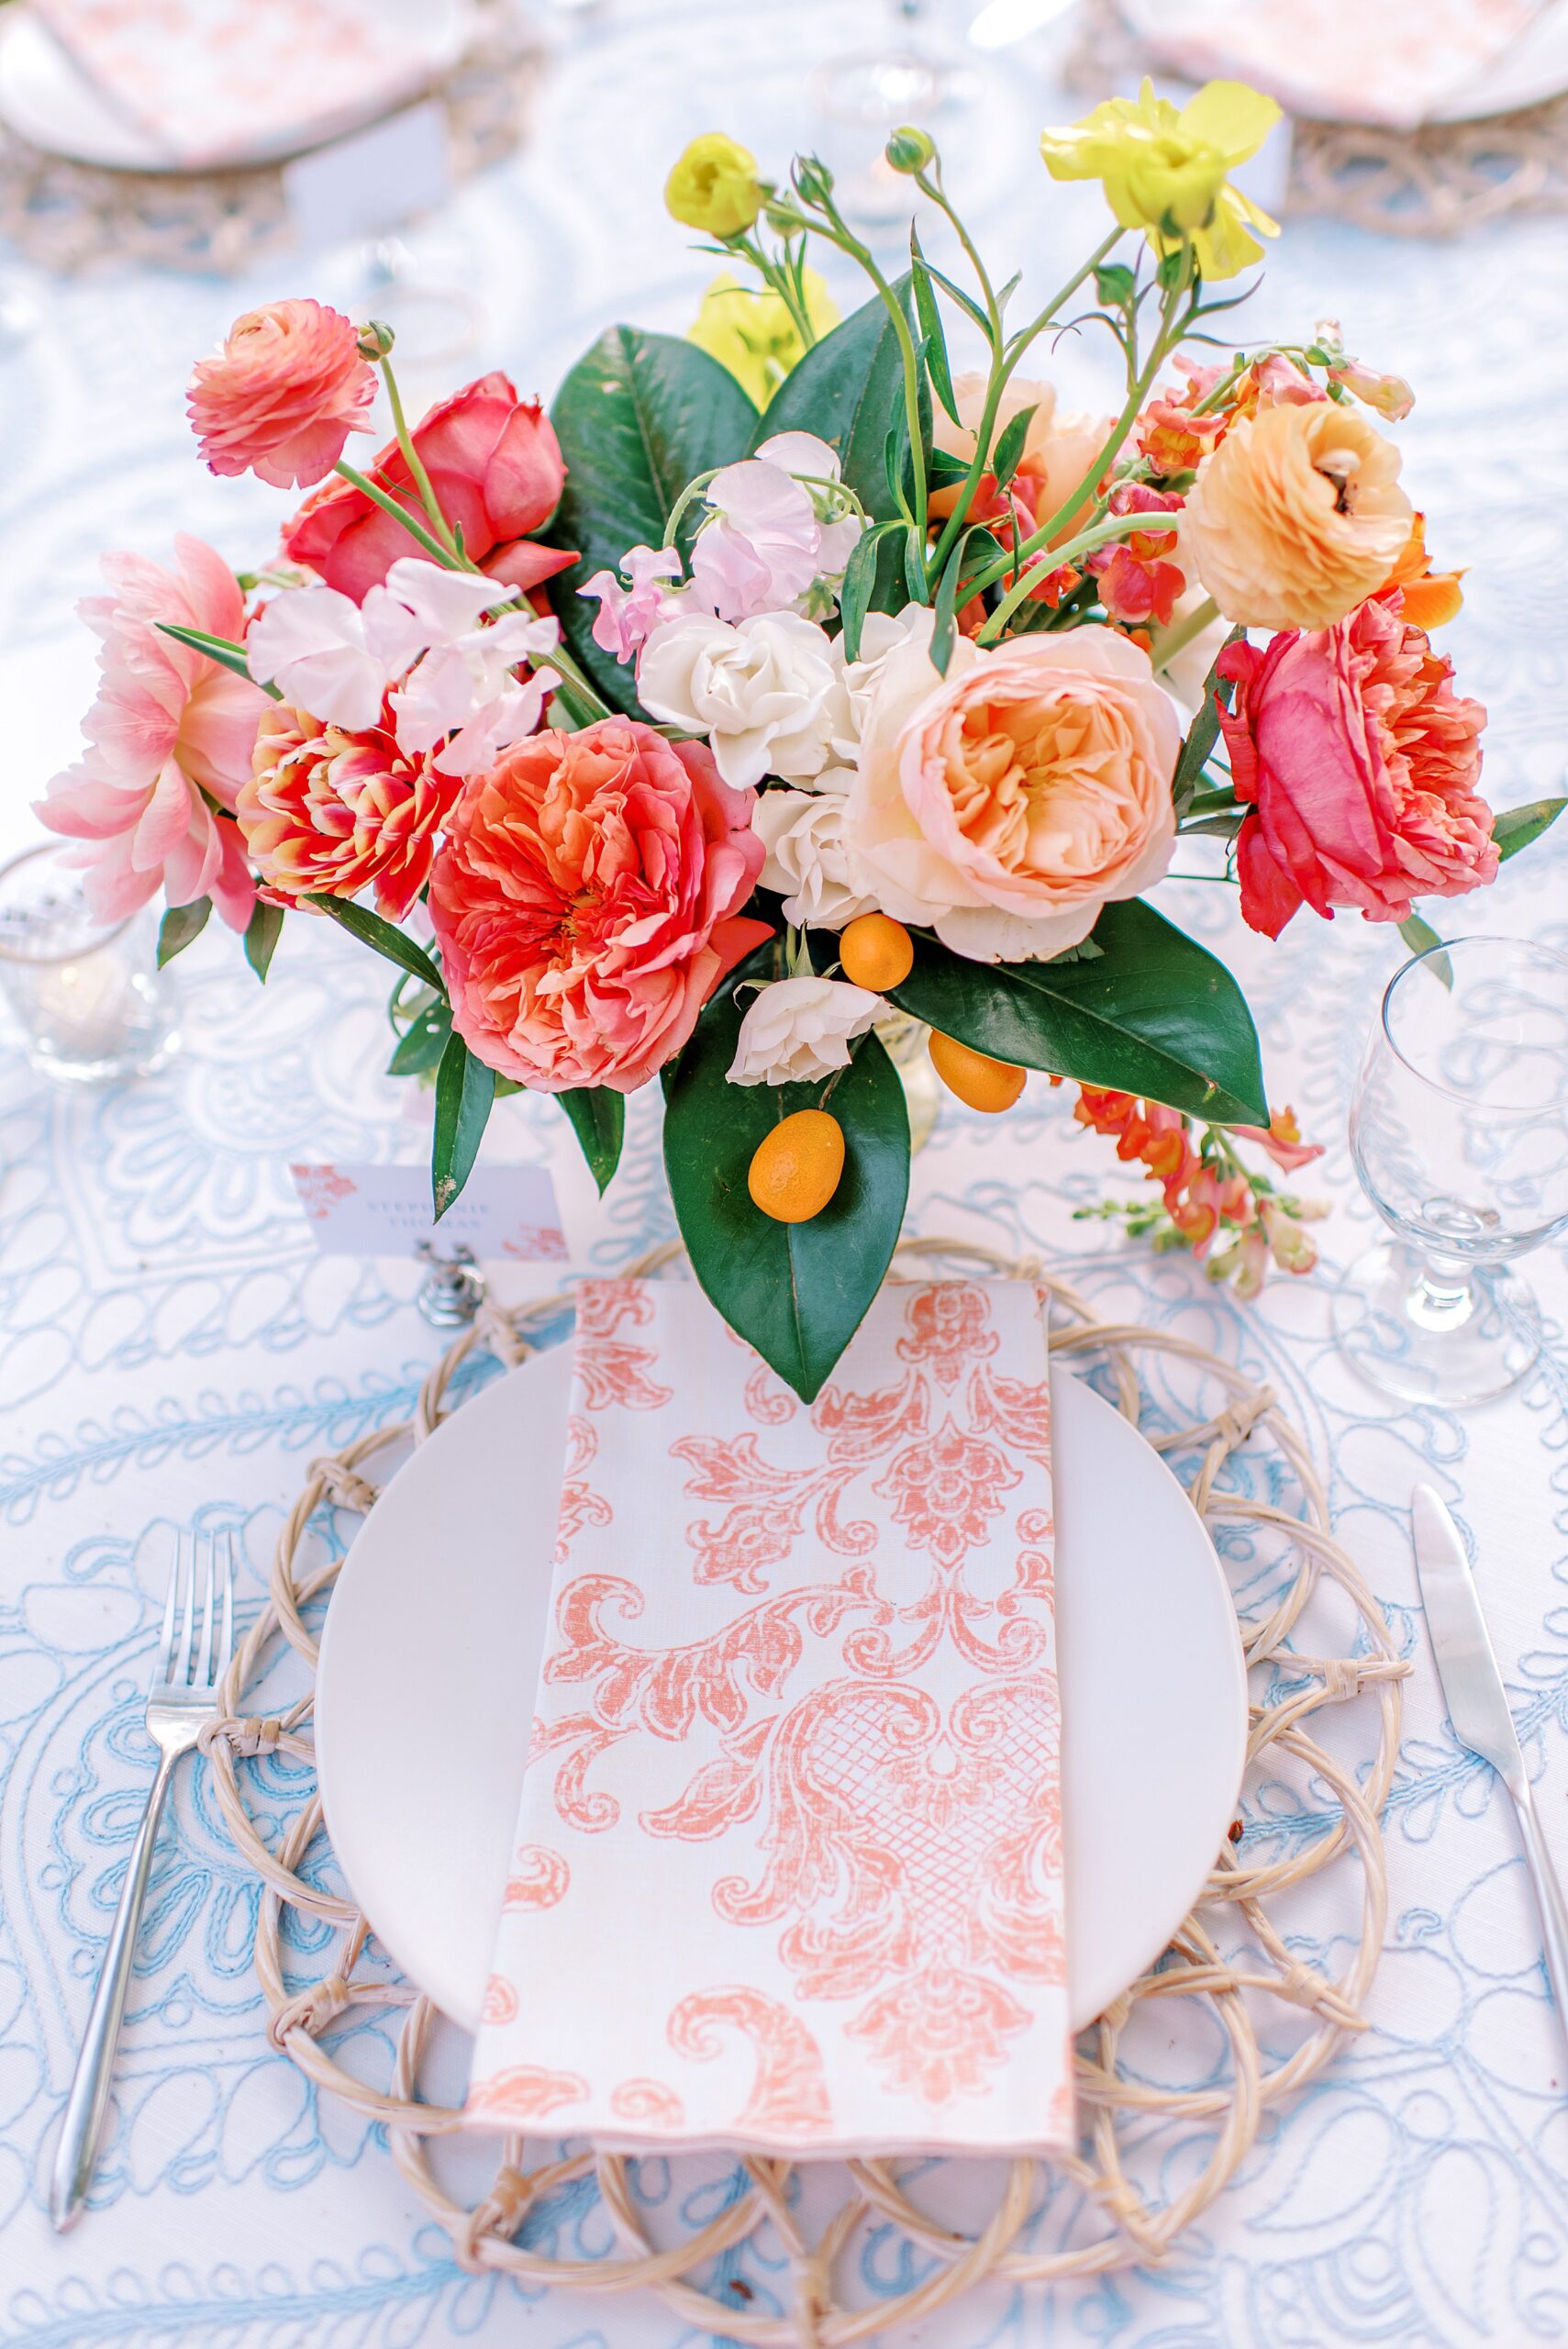 Details of a wedding reception table setting with pink carnations The grande victorian